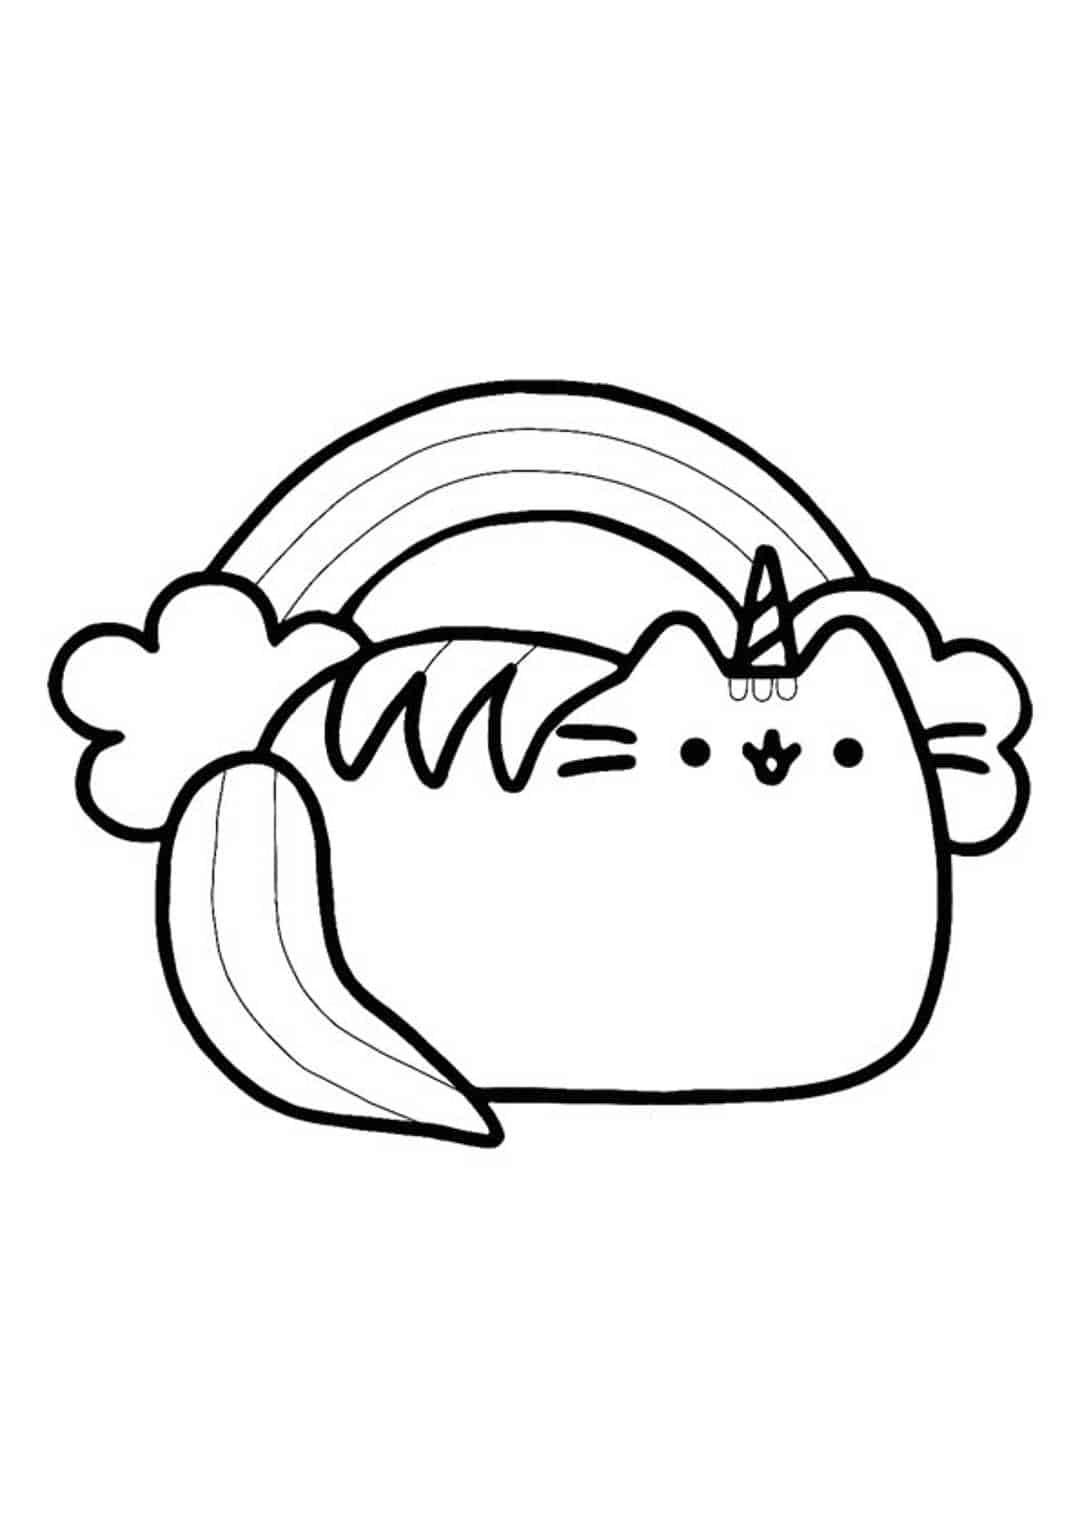 Unicorn Pusheen Cat Coloring Pages Pusheen Unicorn Coloring Pages At Porn Sex Picture